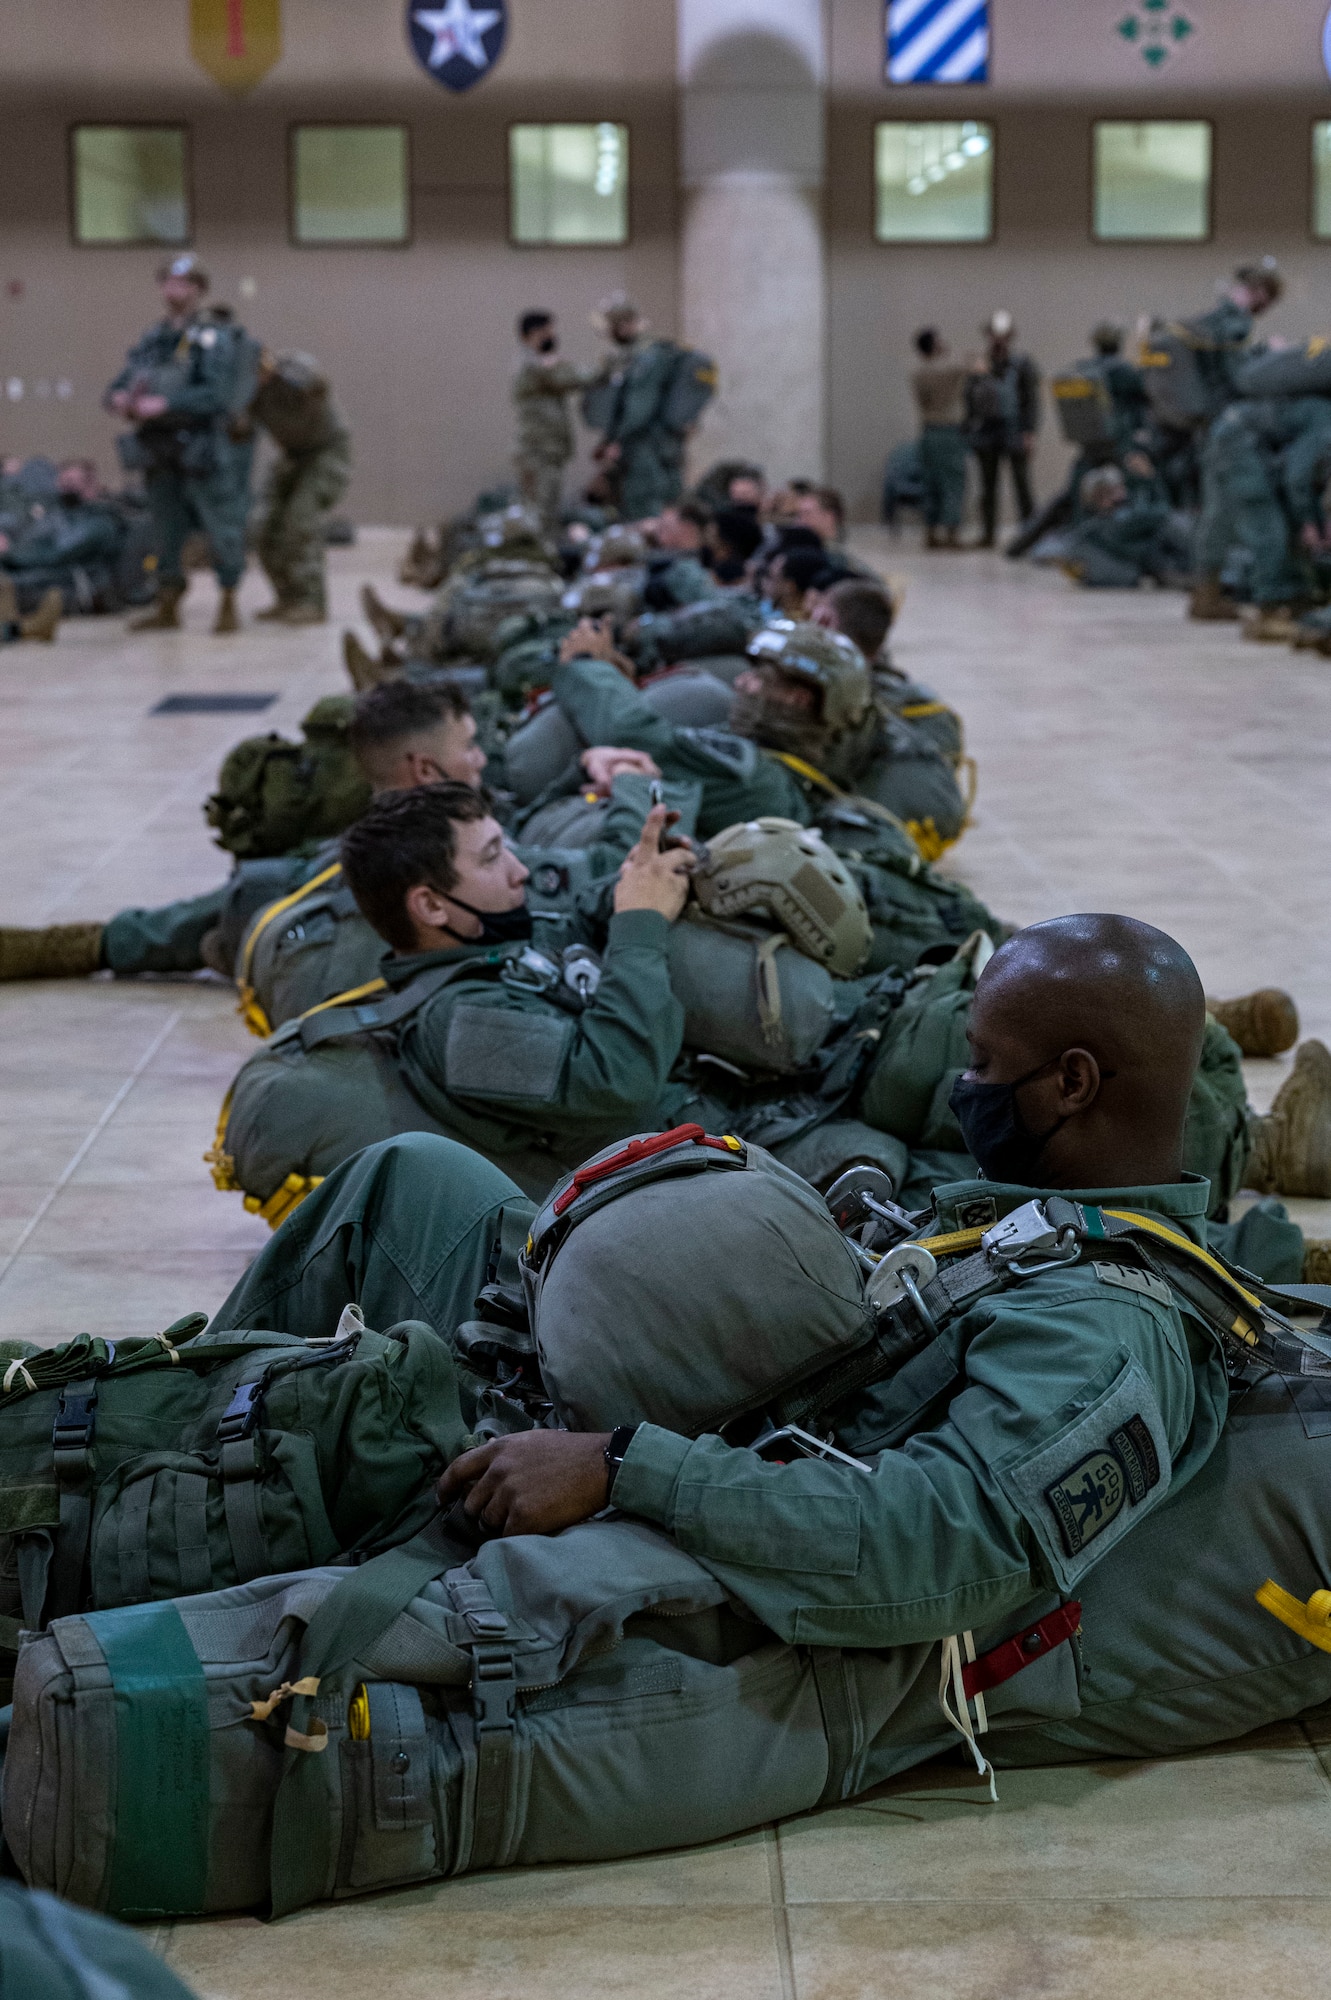 U.S. Army paratroopers with the 1st Battalion, 509th Infantry Regiment, prepare for a jump